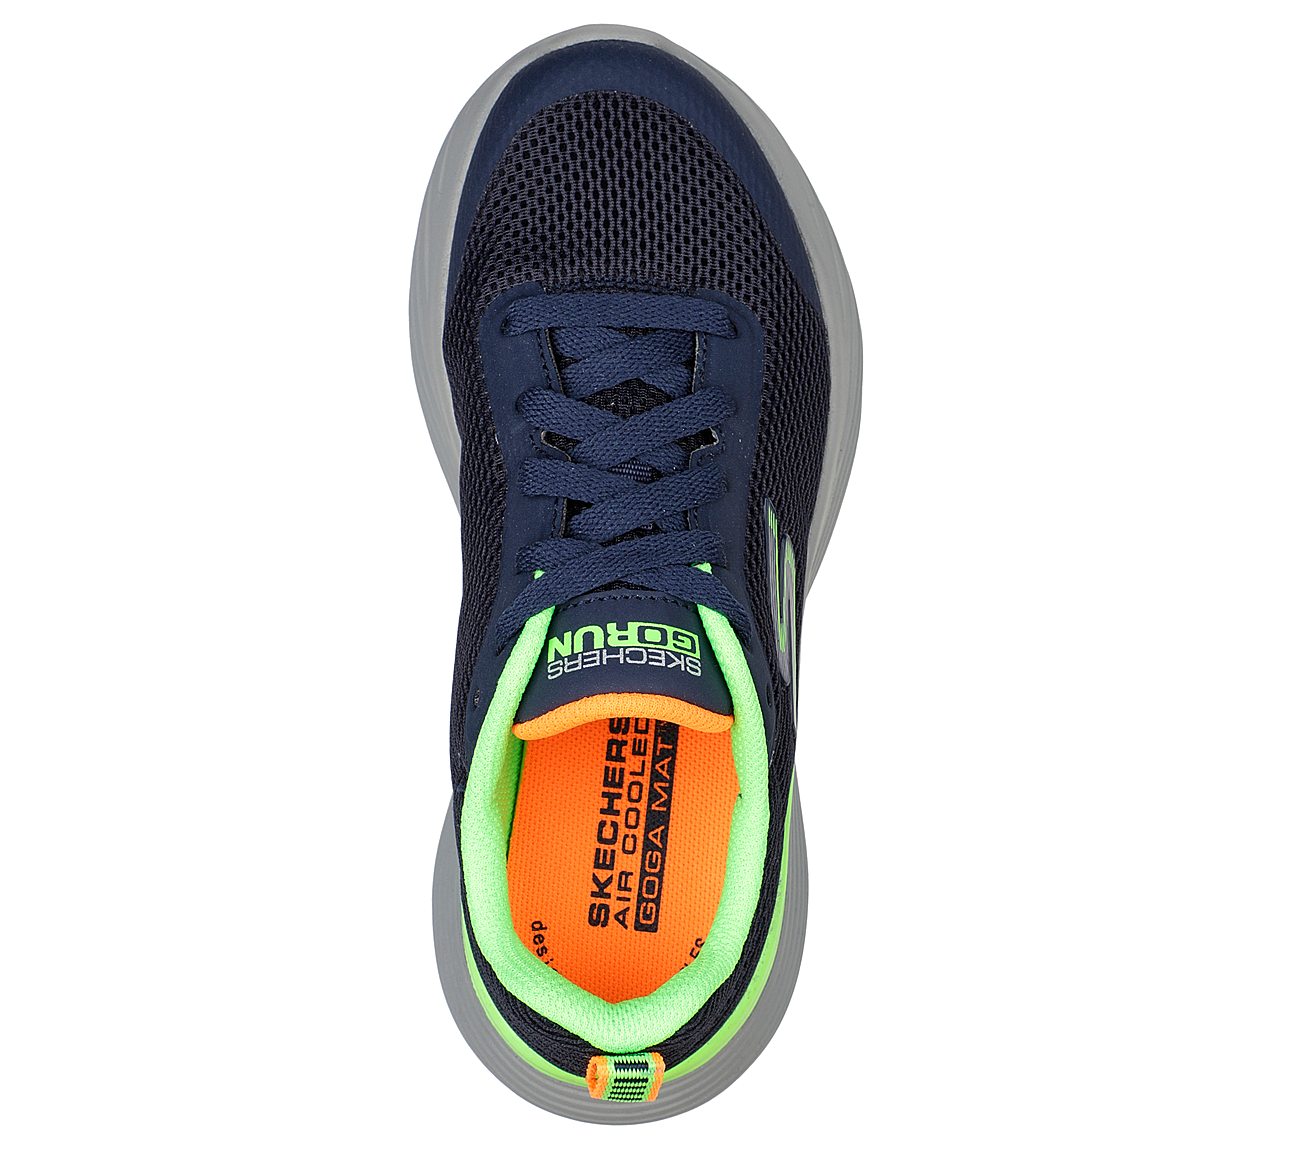 GO RUN 400 V2 - OMEGA, NAVY/LIME Footwear Top View